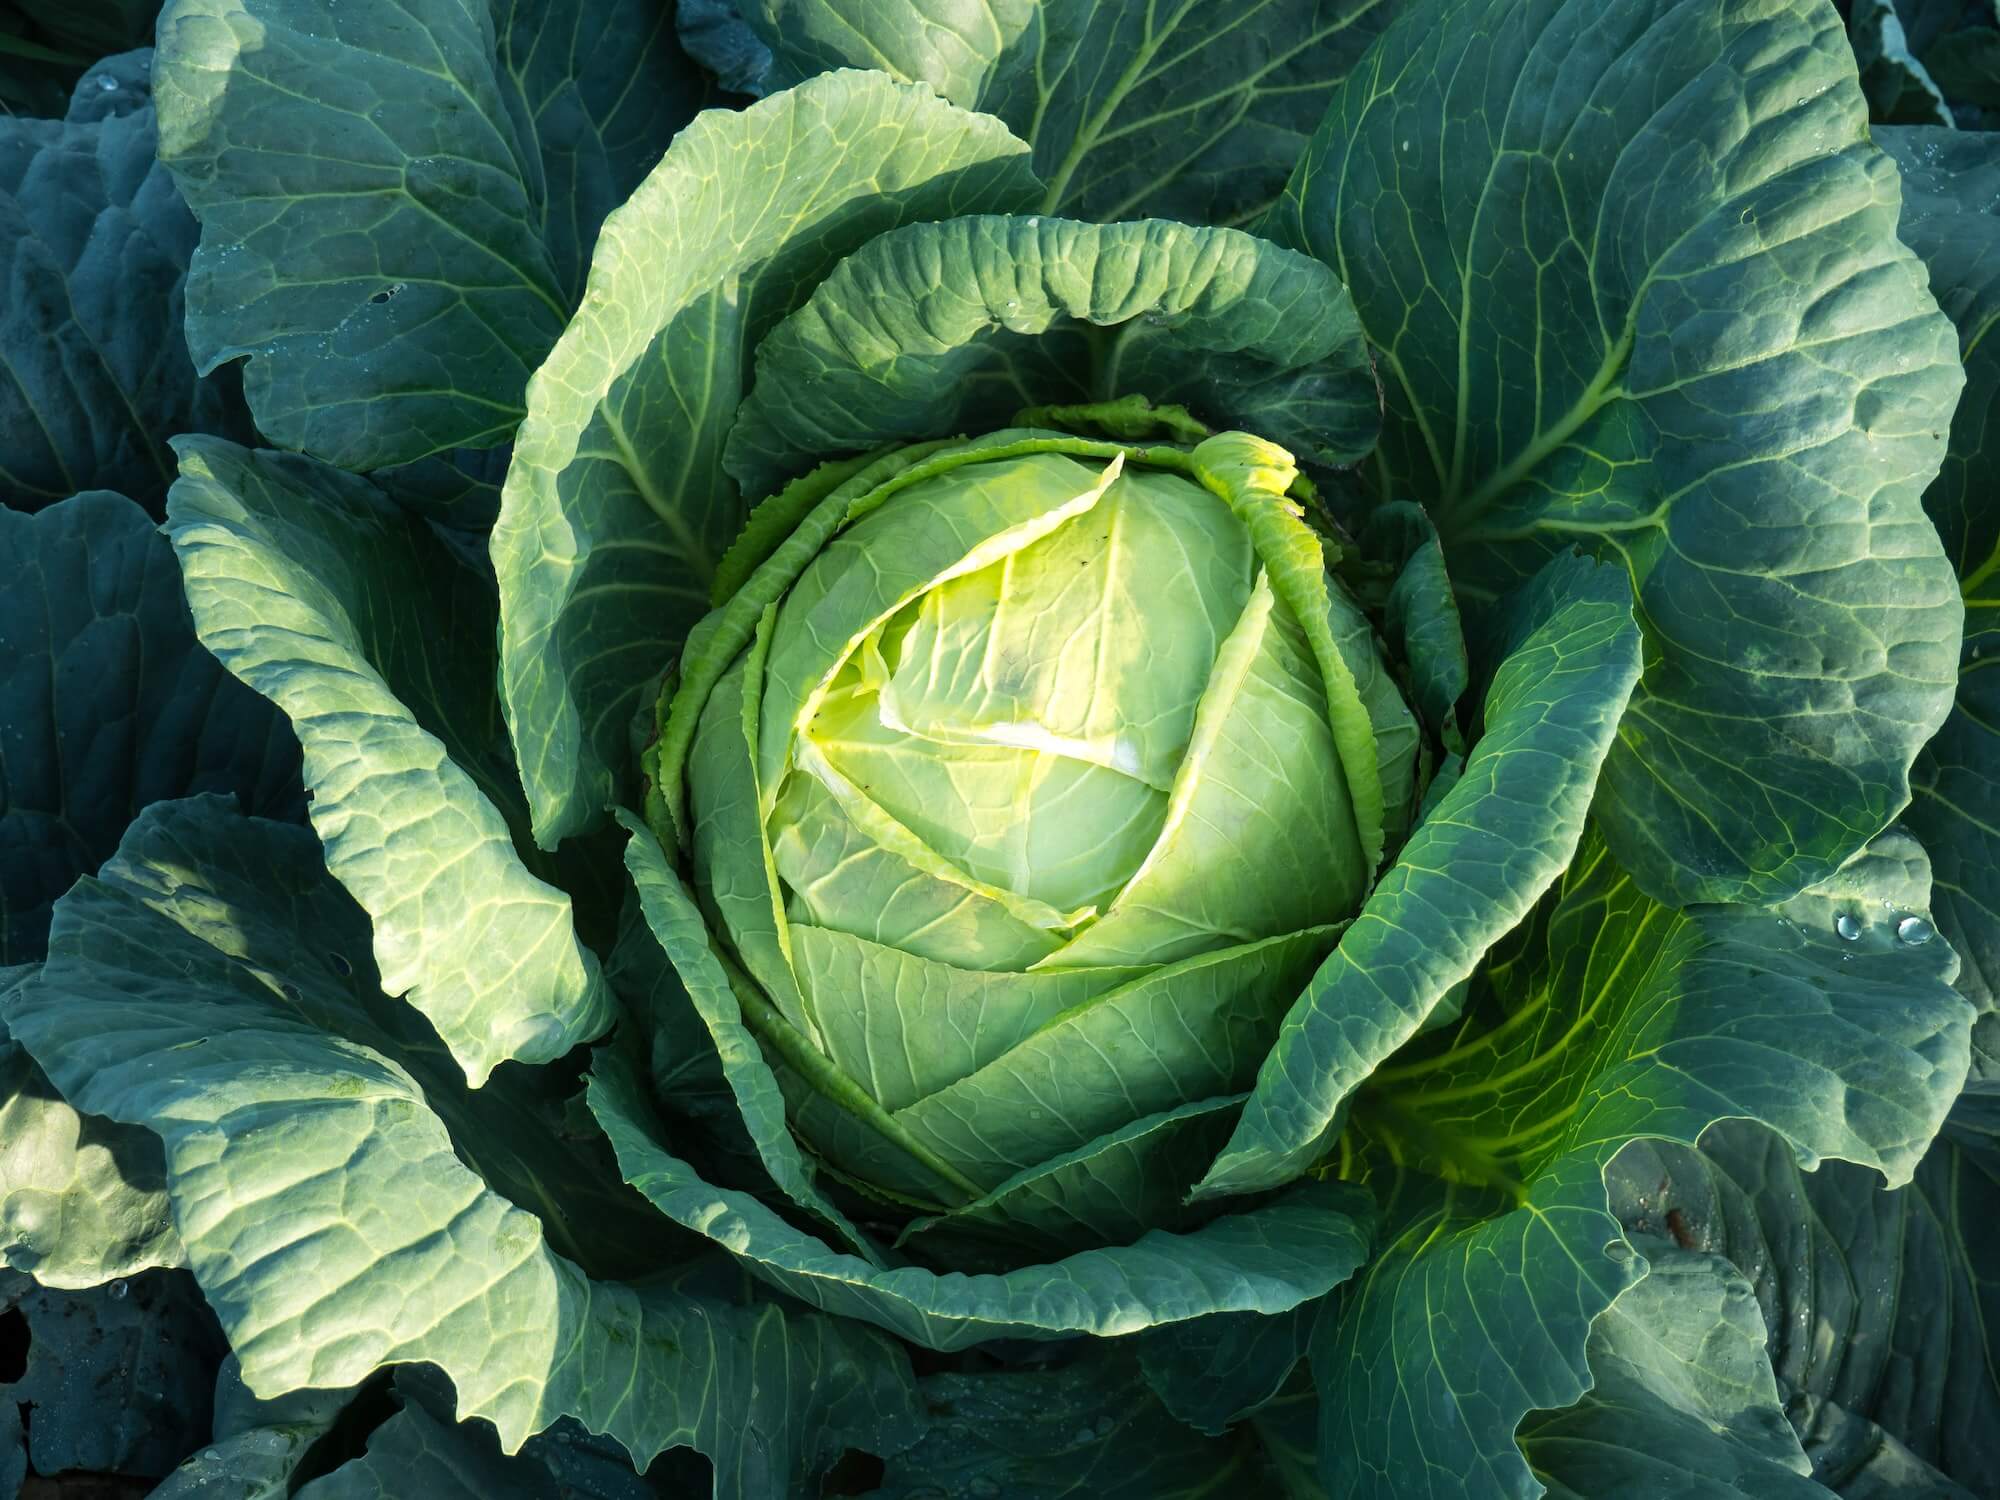 Brassicas Seeds grown into full brassicas cabbage